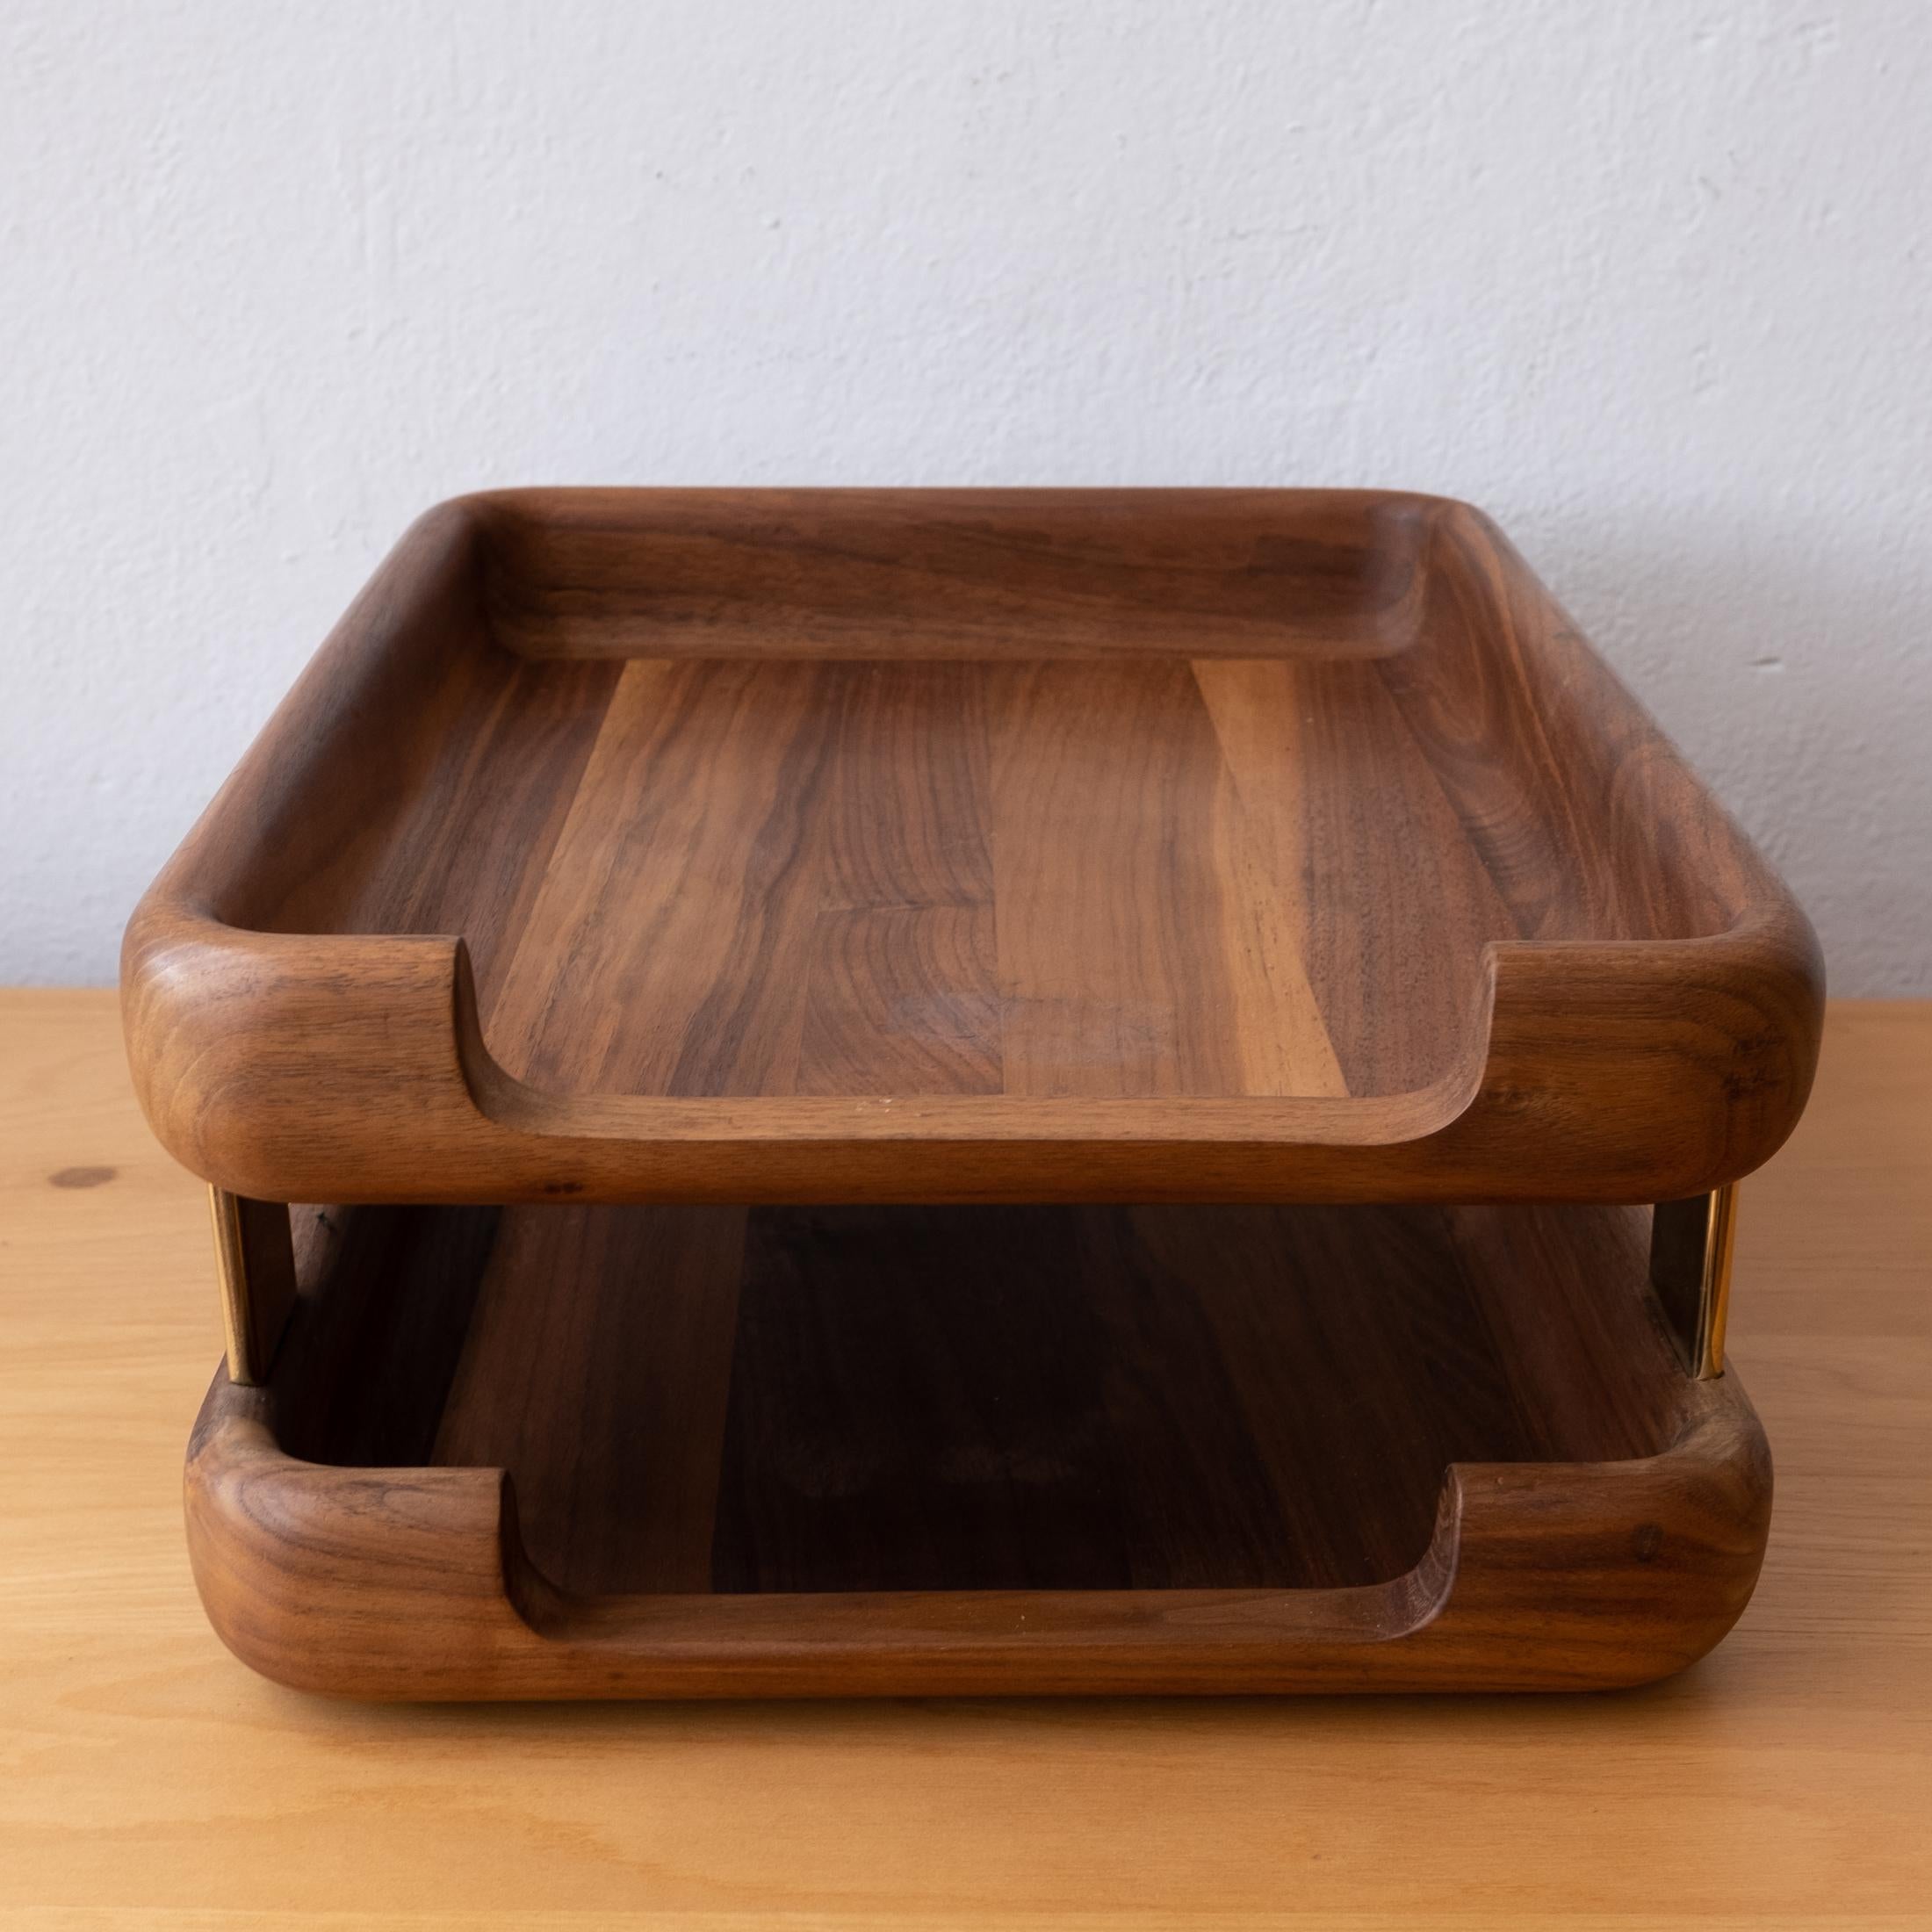 A high-quality solid walnut letter tray with brass elements. Substantial construction with two levels. Rounded smooth corners with a felt-lined bottom.